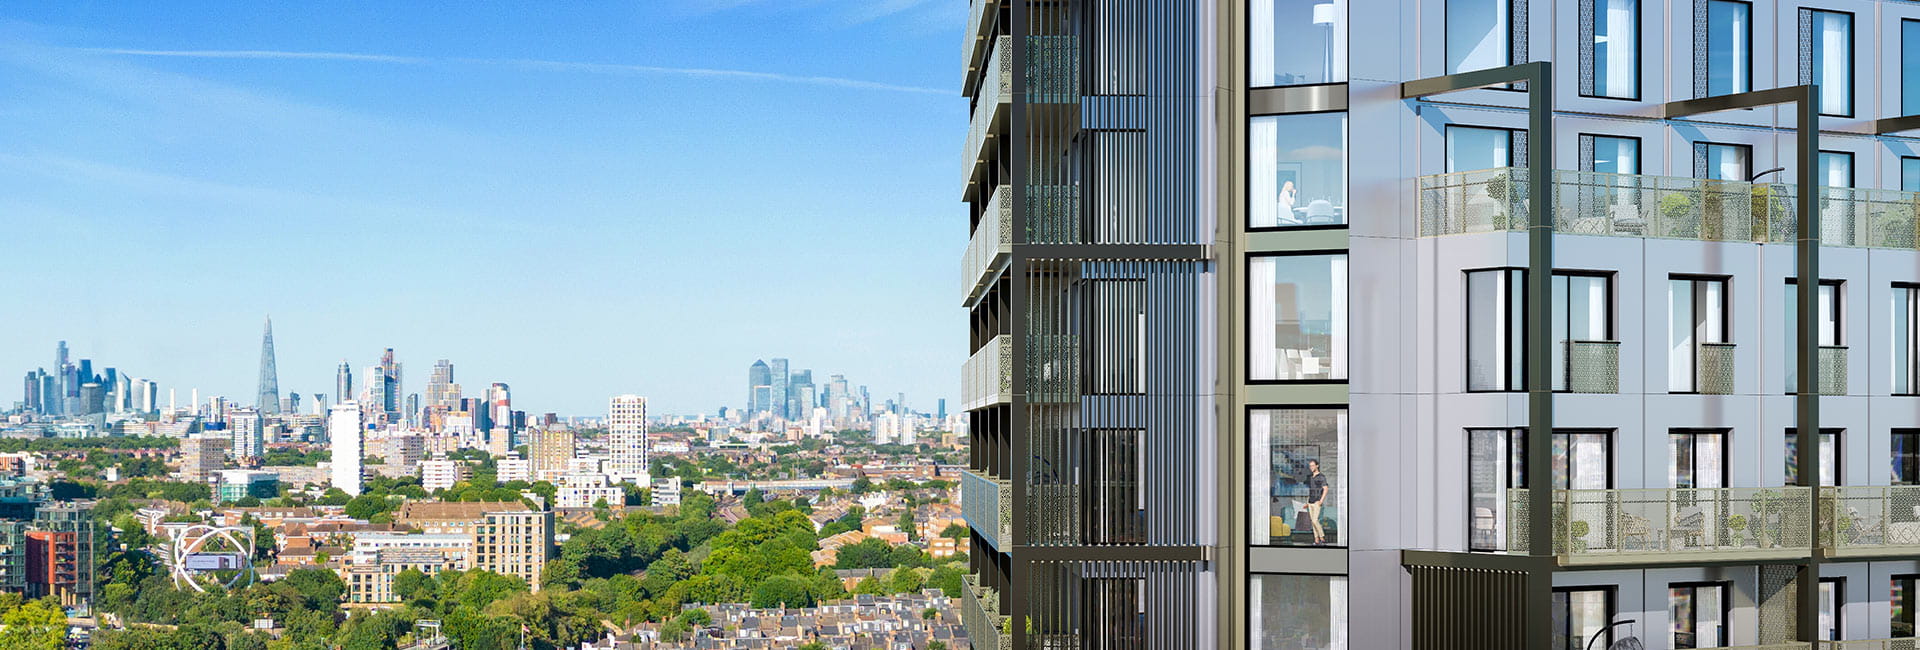 Exterior image of Wandsworth Mills with the London skyline in the background